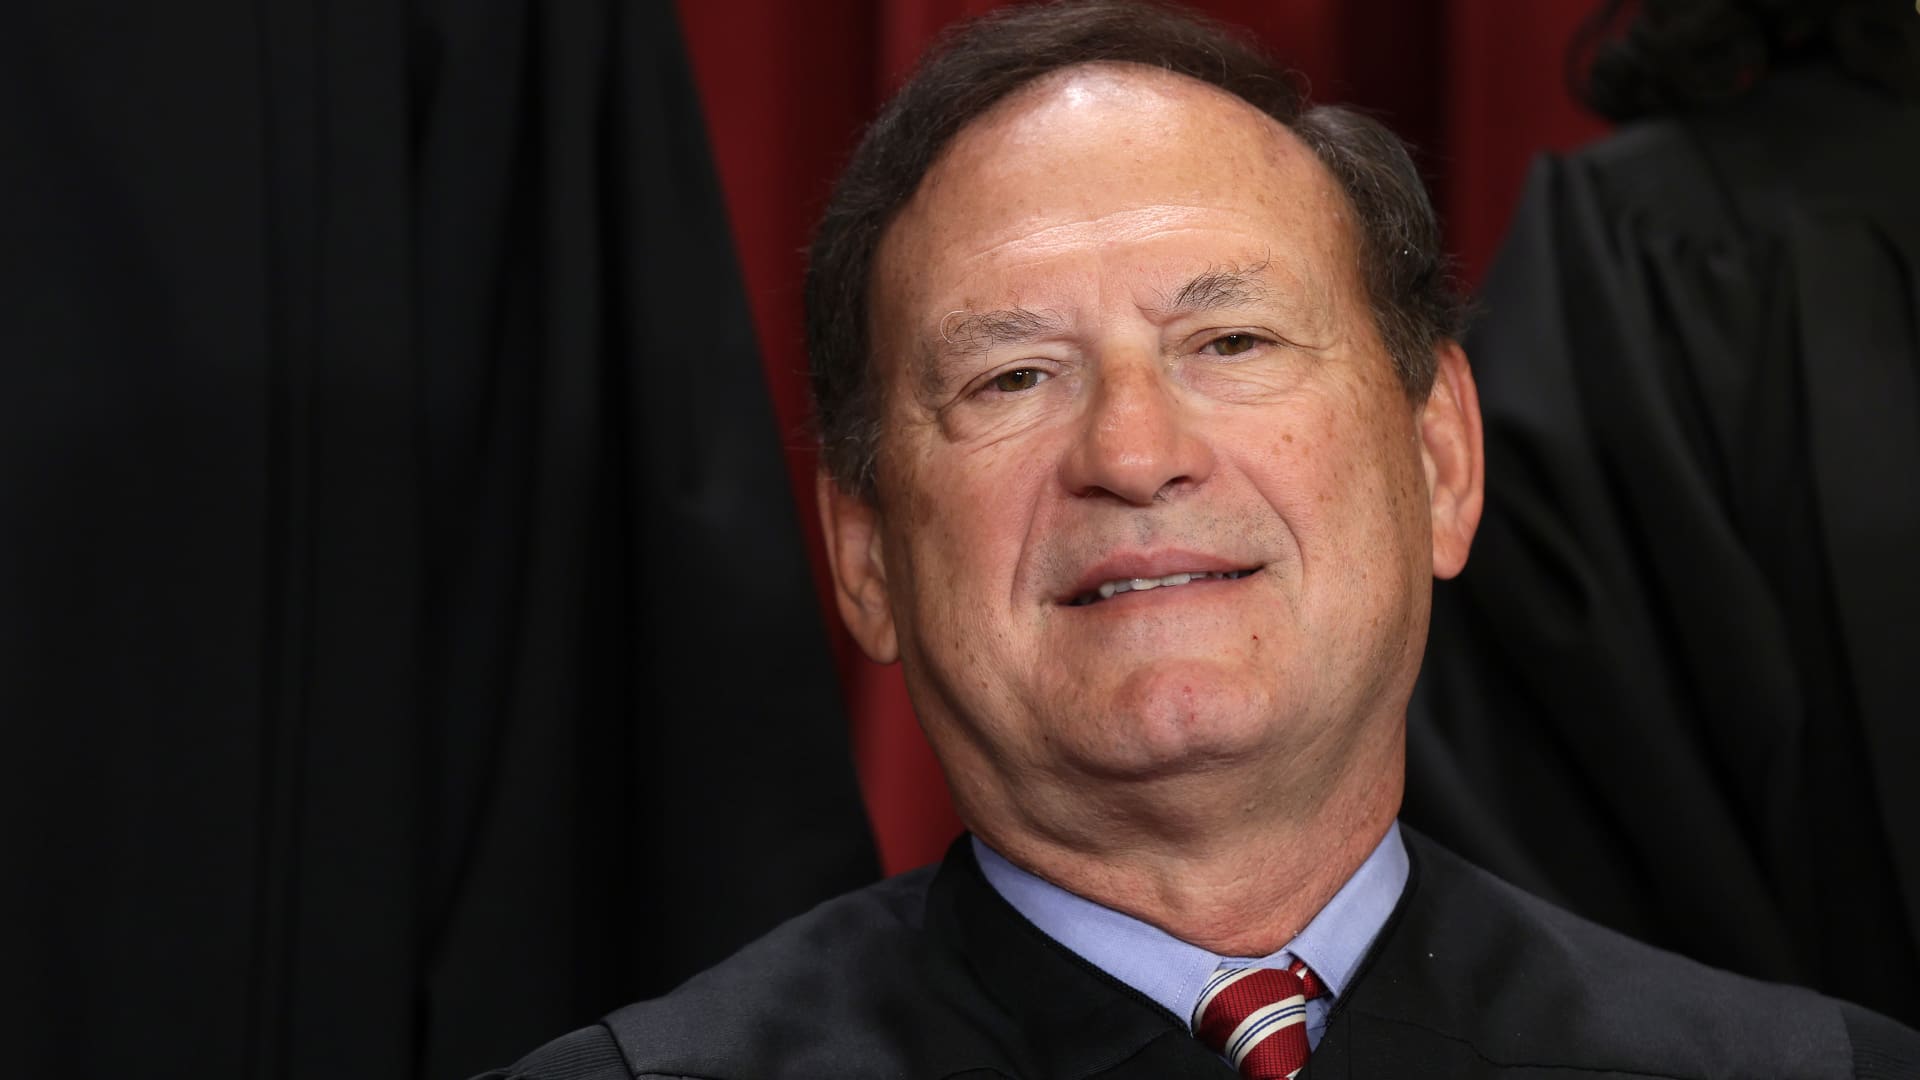 Supreme Court Justice Alito sold AB InBev and bought Coors